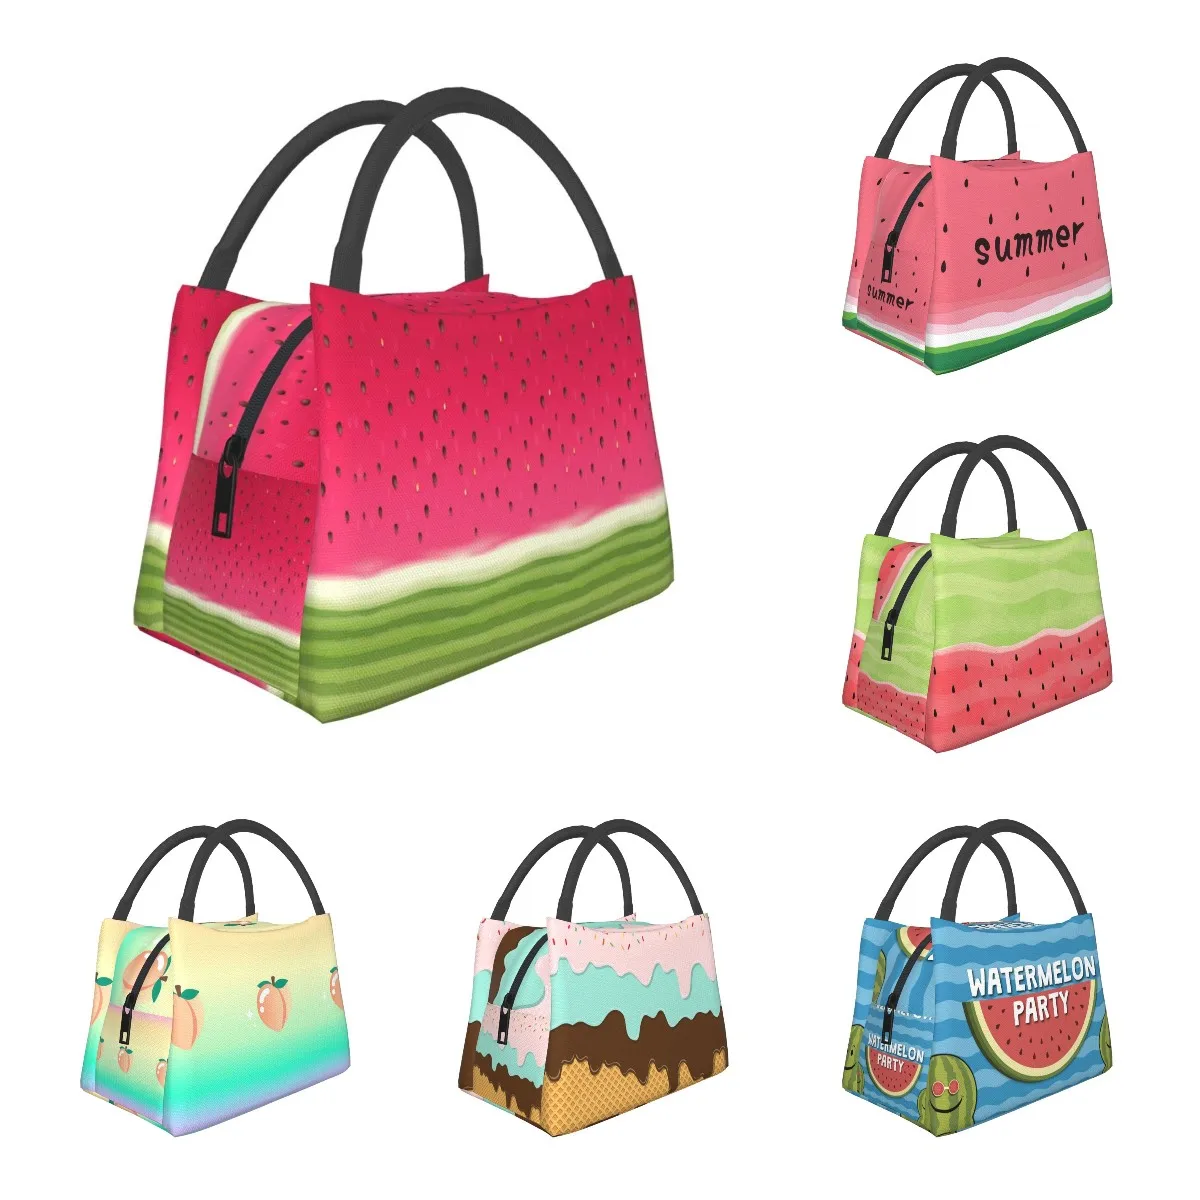 Bento Insulated Bag Cooler Bags For Kids Girls Women Tote Bag For Outdoor Shcool Work Picnic